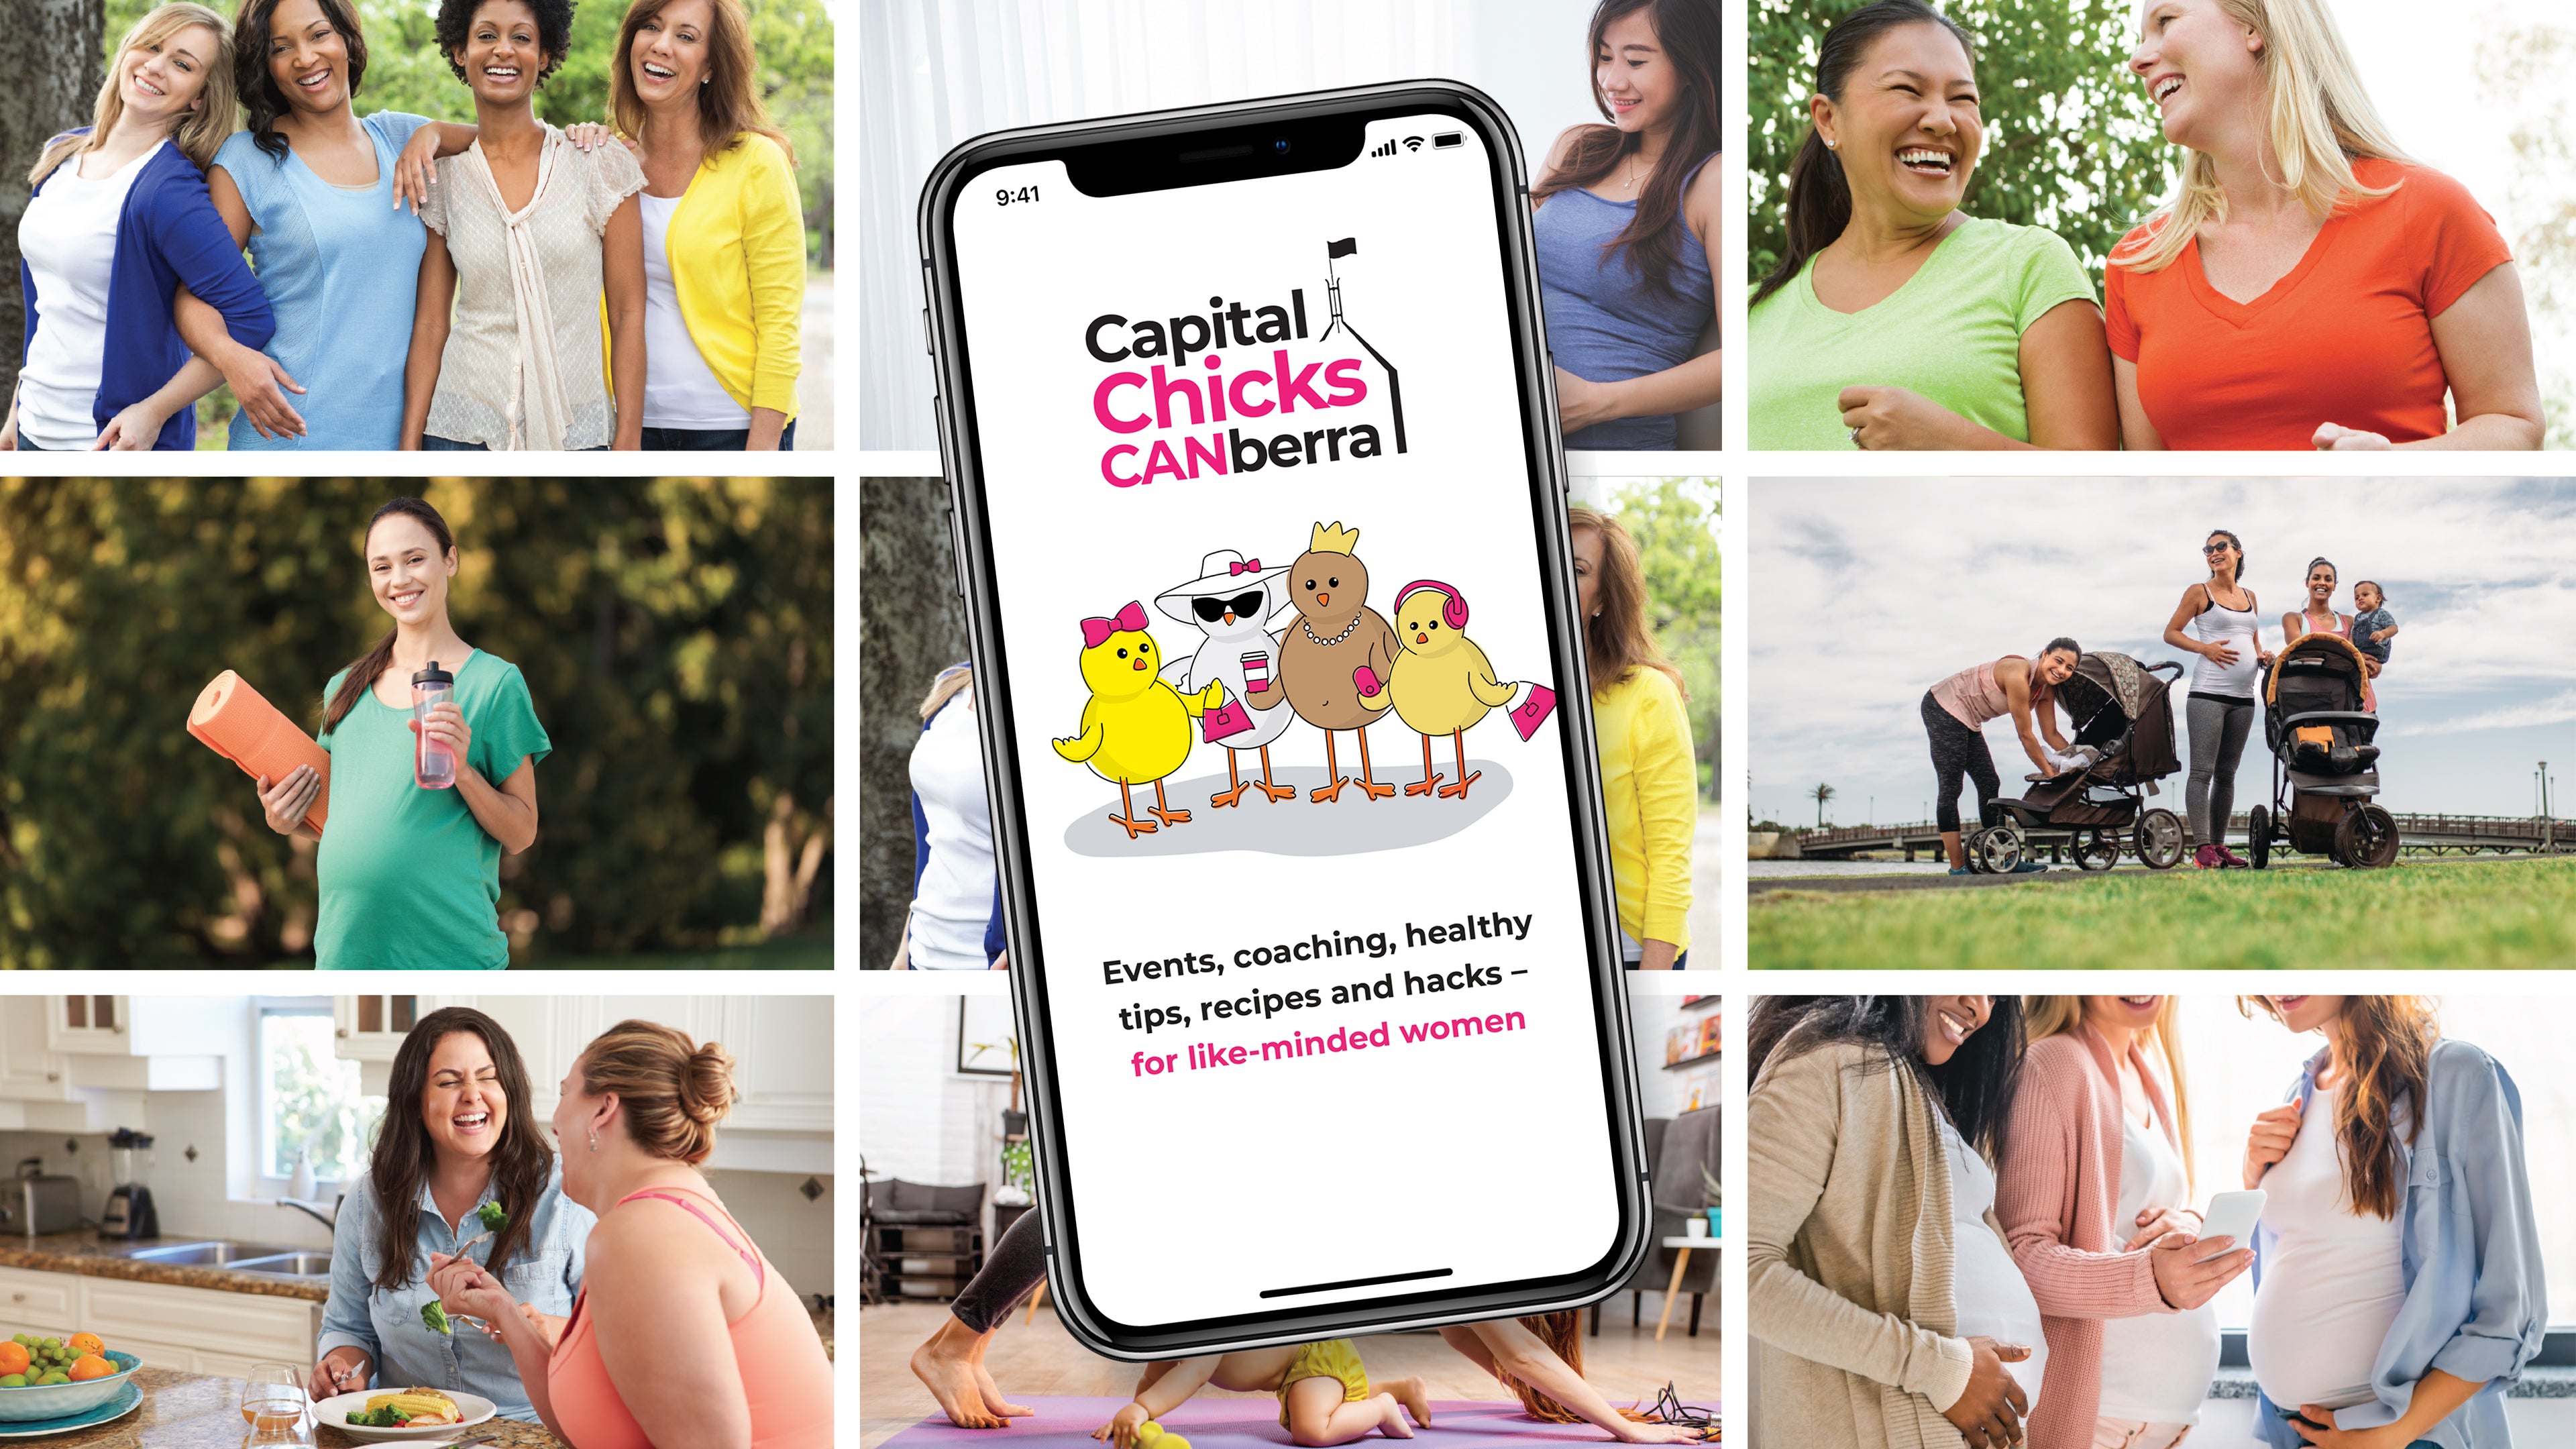 Capital Chicks CANberra